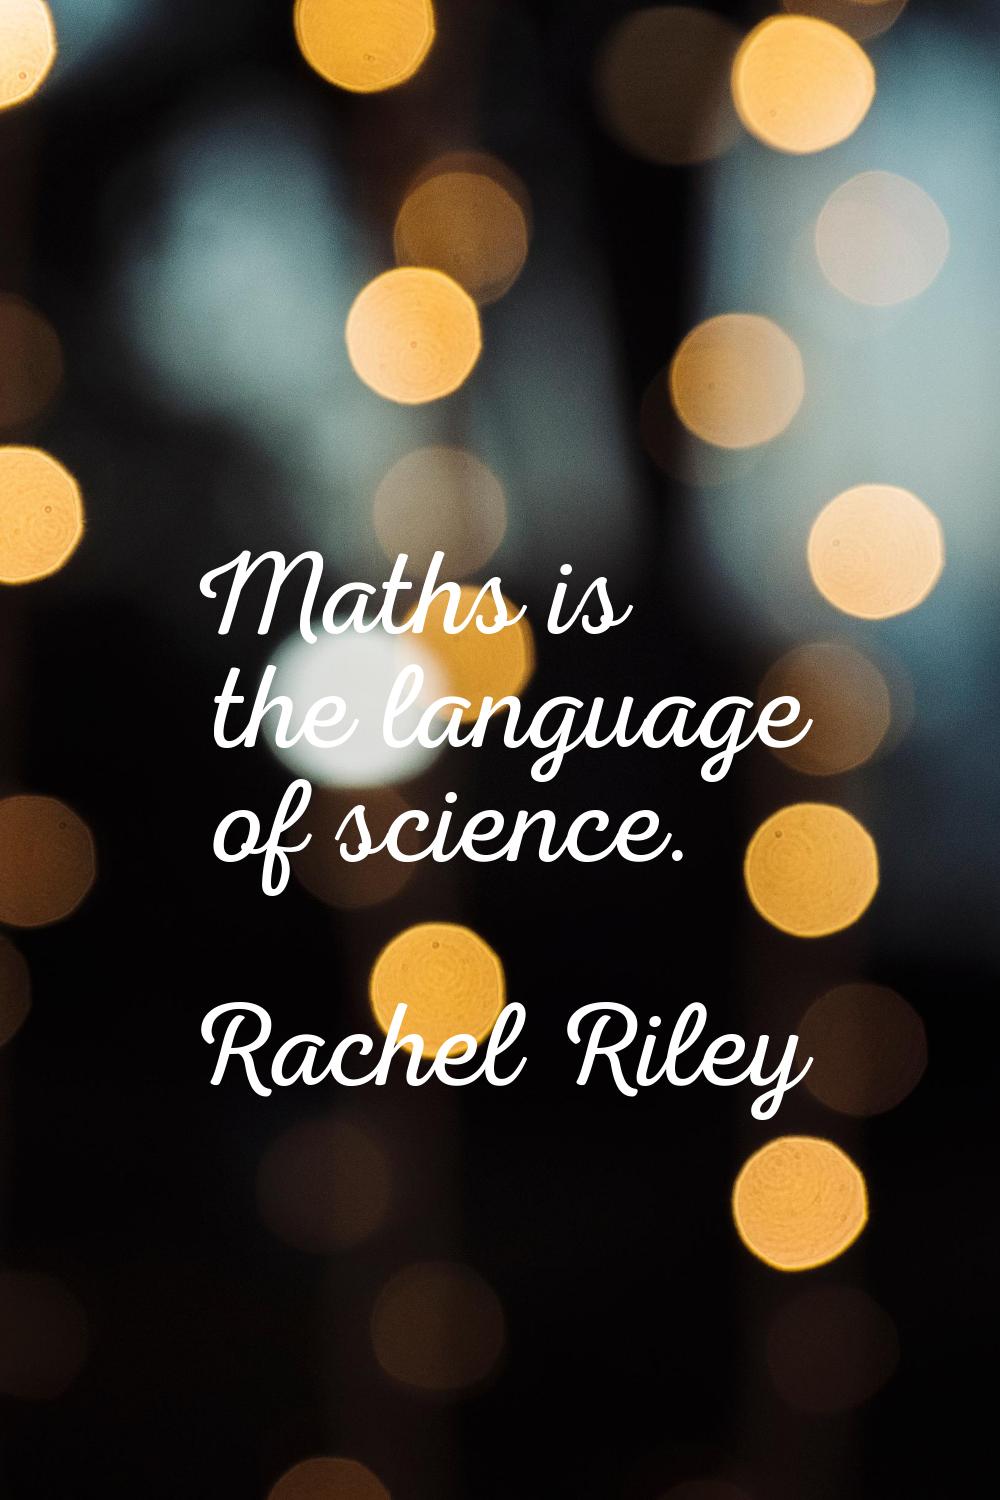 Maths is the language of science.